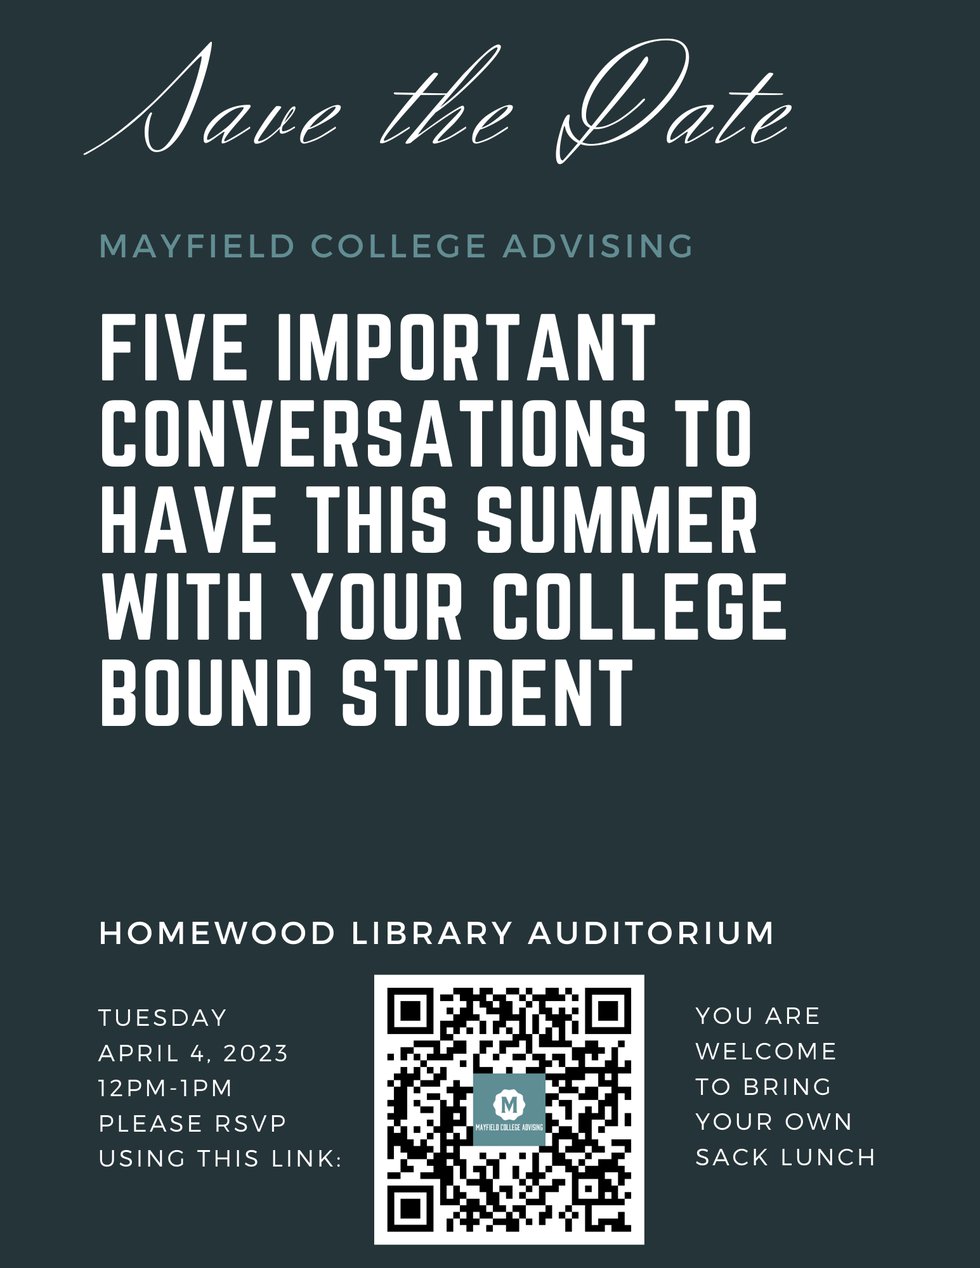 Mayfield College Advising / Tuesday April 4 12pm-1pm at the Homewood Library Auditorium / "Summer planning for college bound students of any age - 1